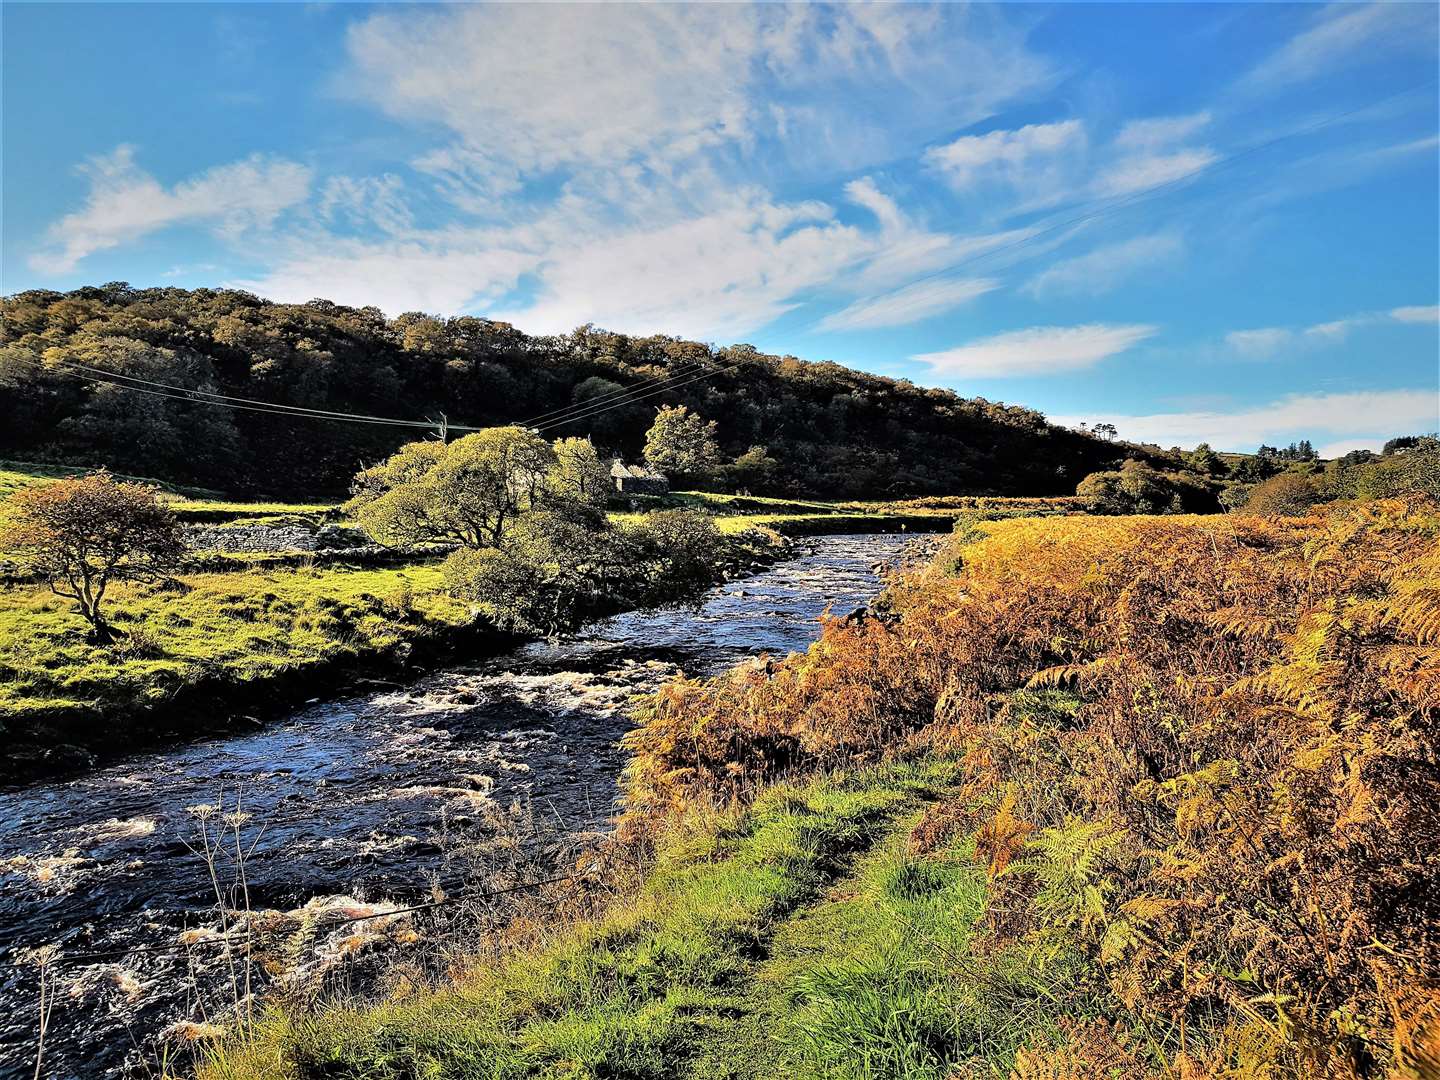 Judith’s photo of Dunbeath Strath for the October page of the current Groat calendar.